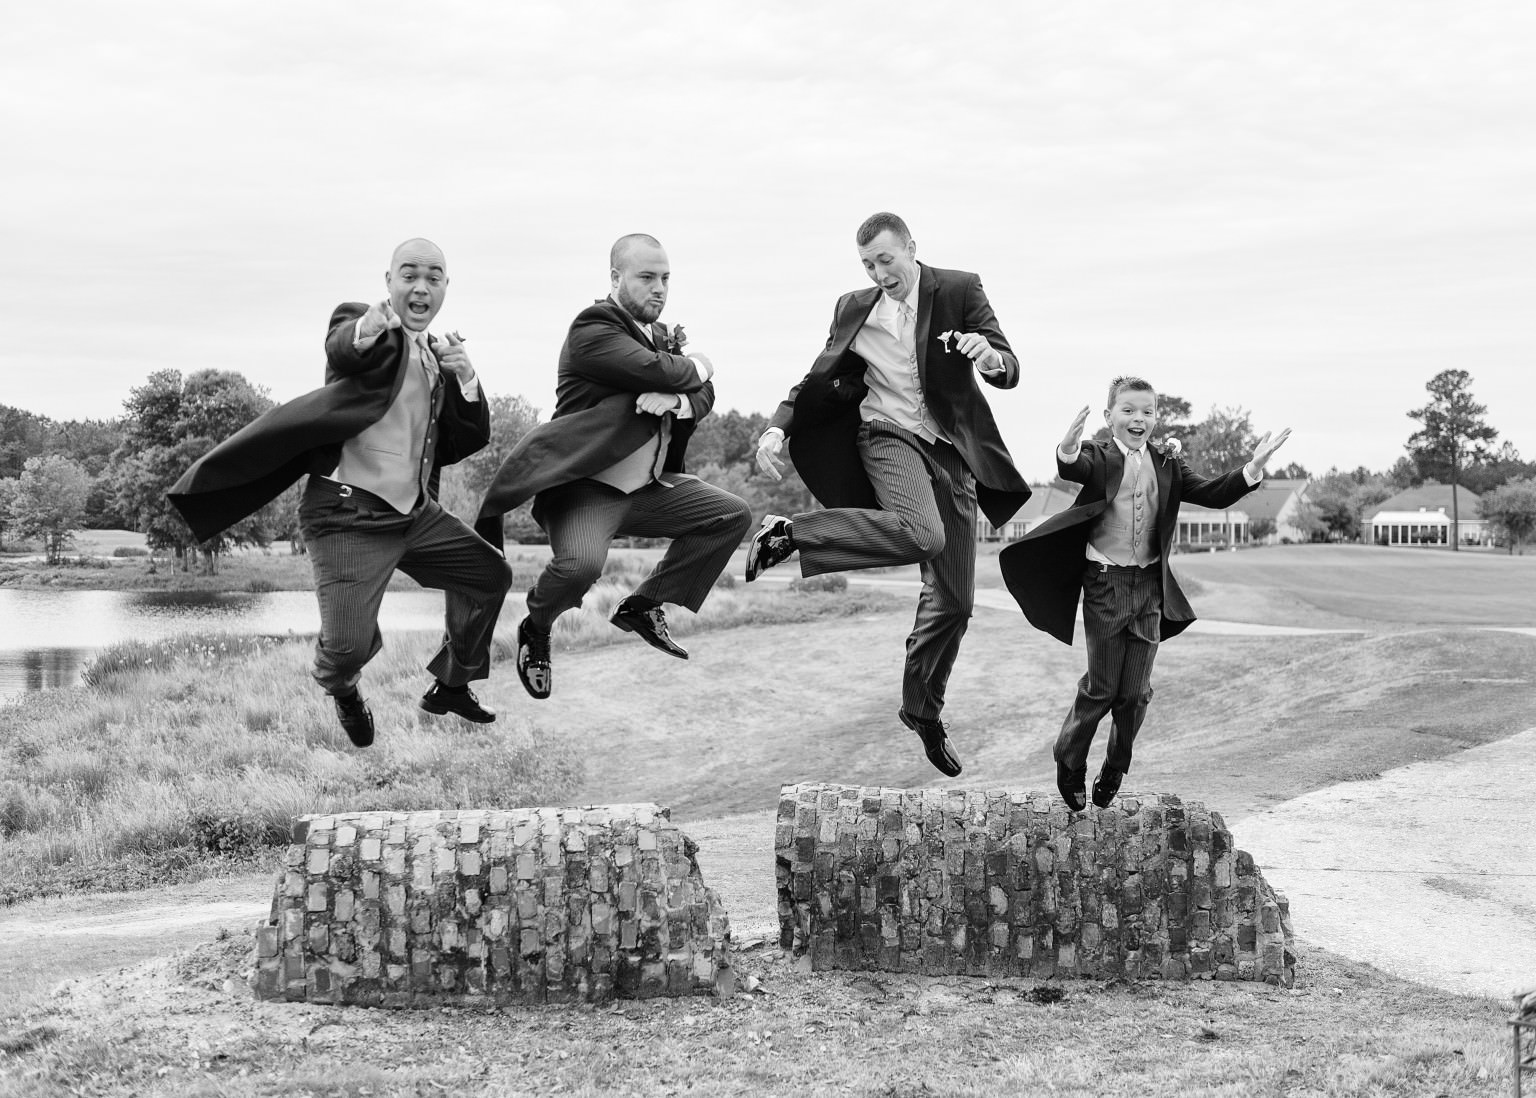 Groomsmen jumping off ruins in black and white